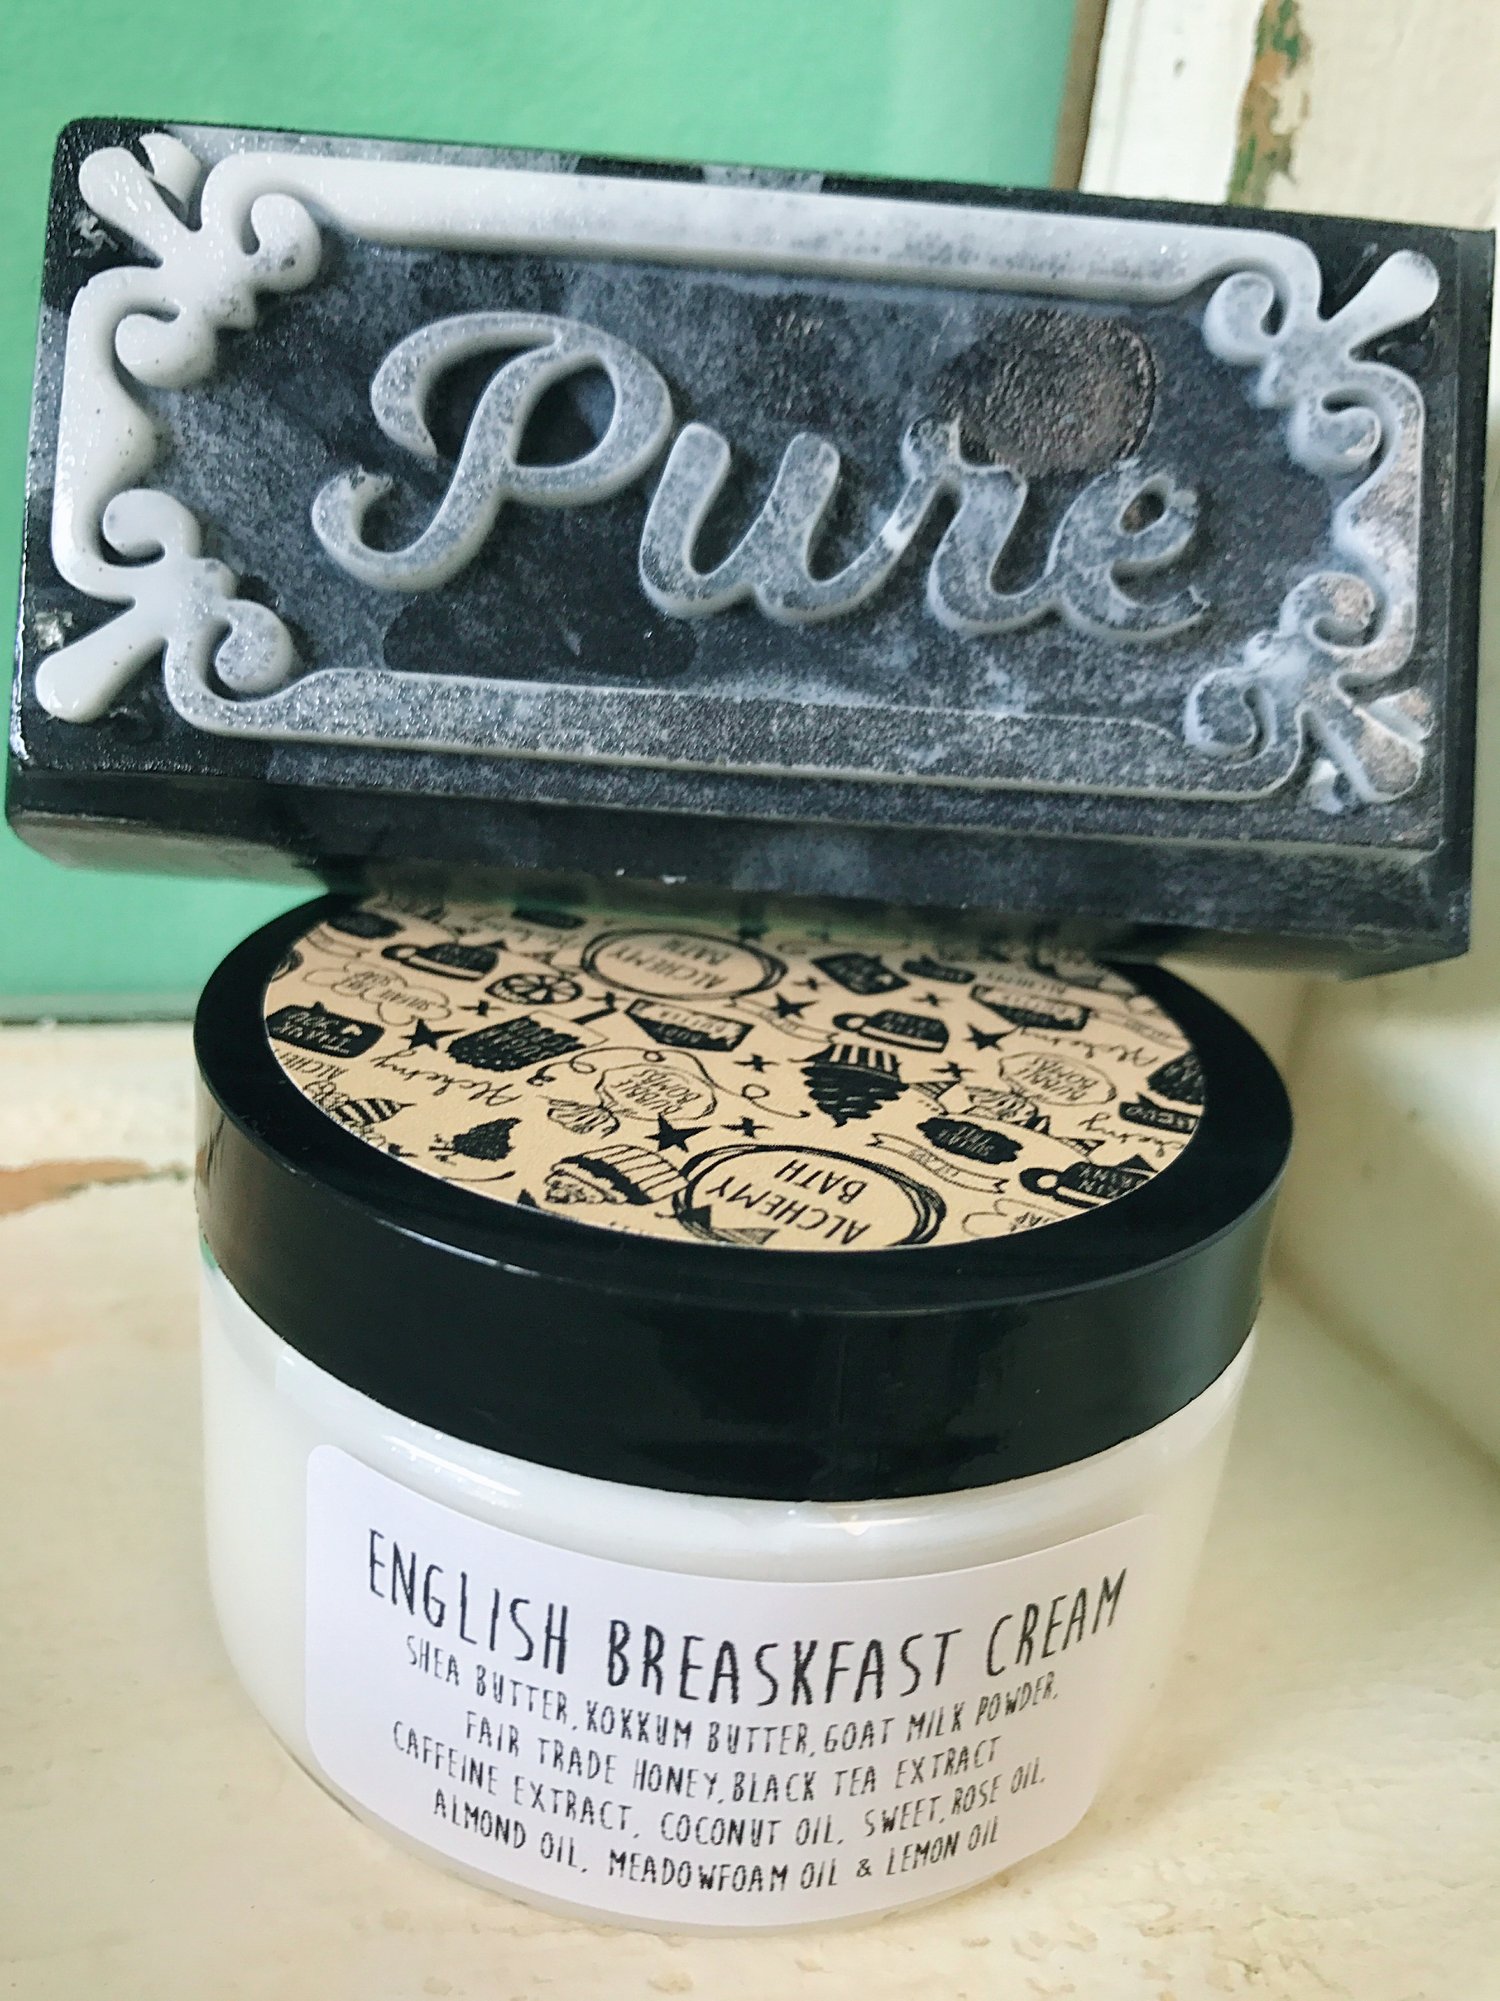 Image of Charcoal Soap & English Breakfast Cream Duo